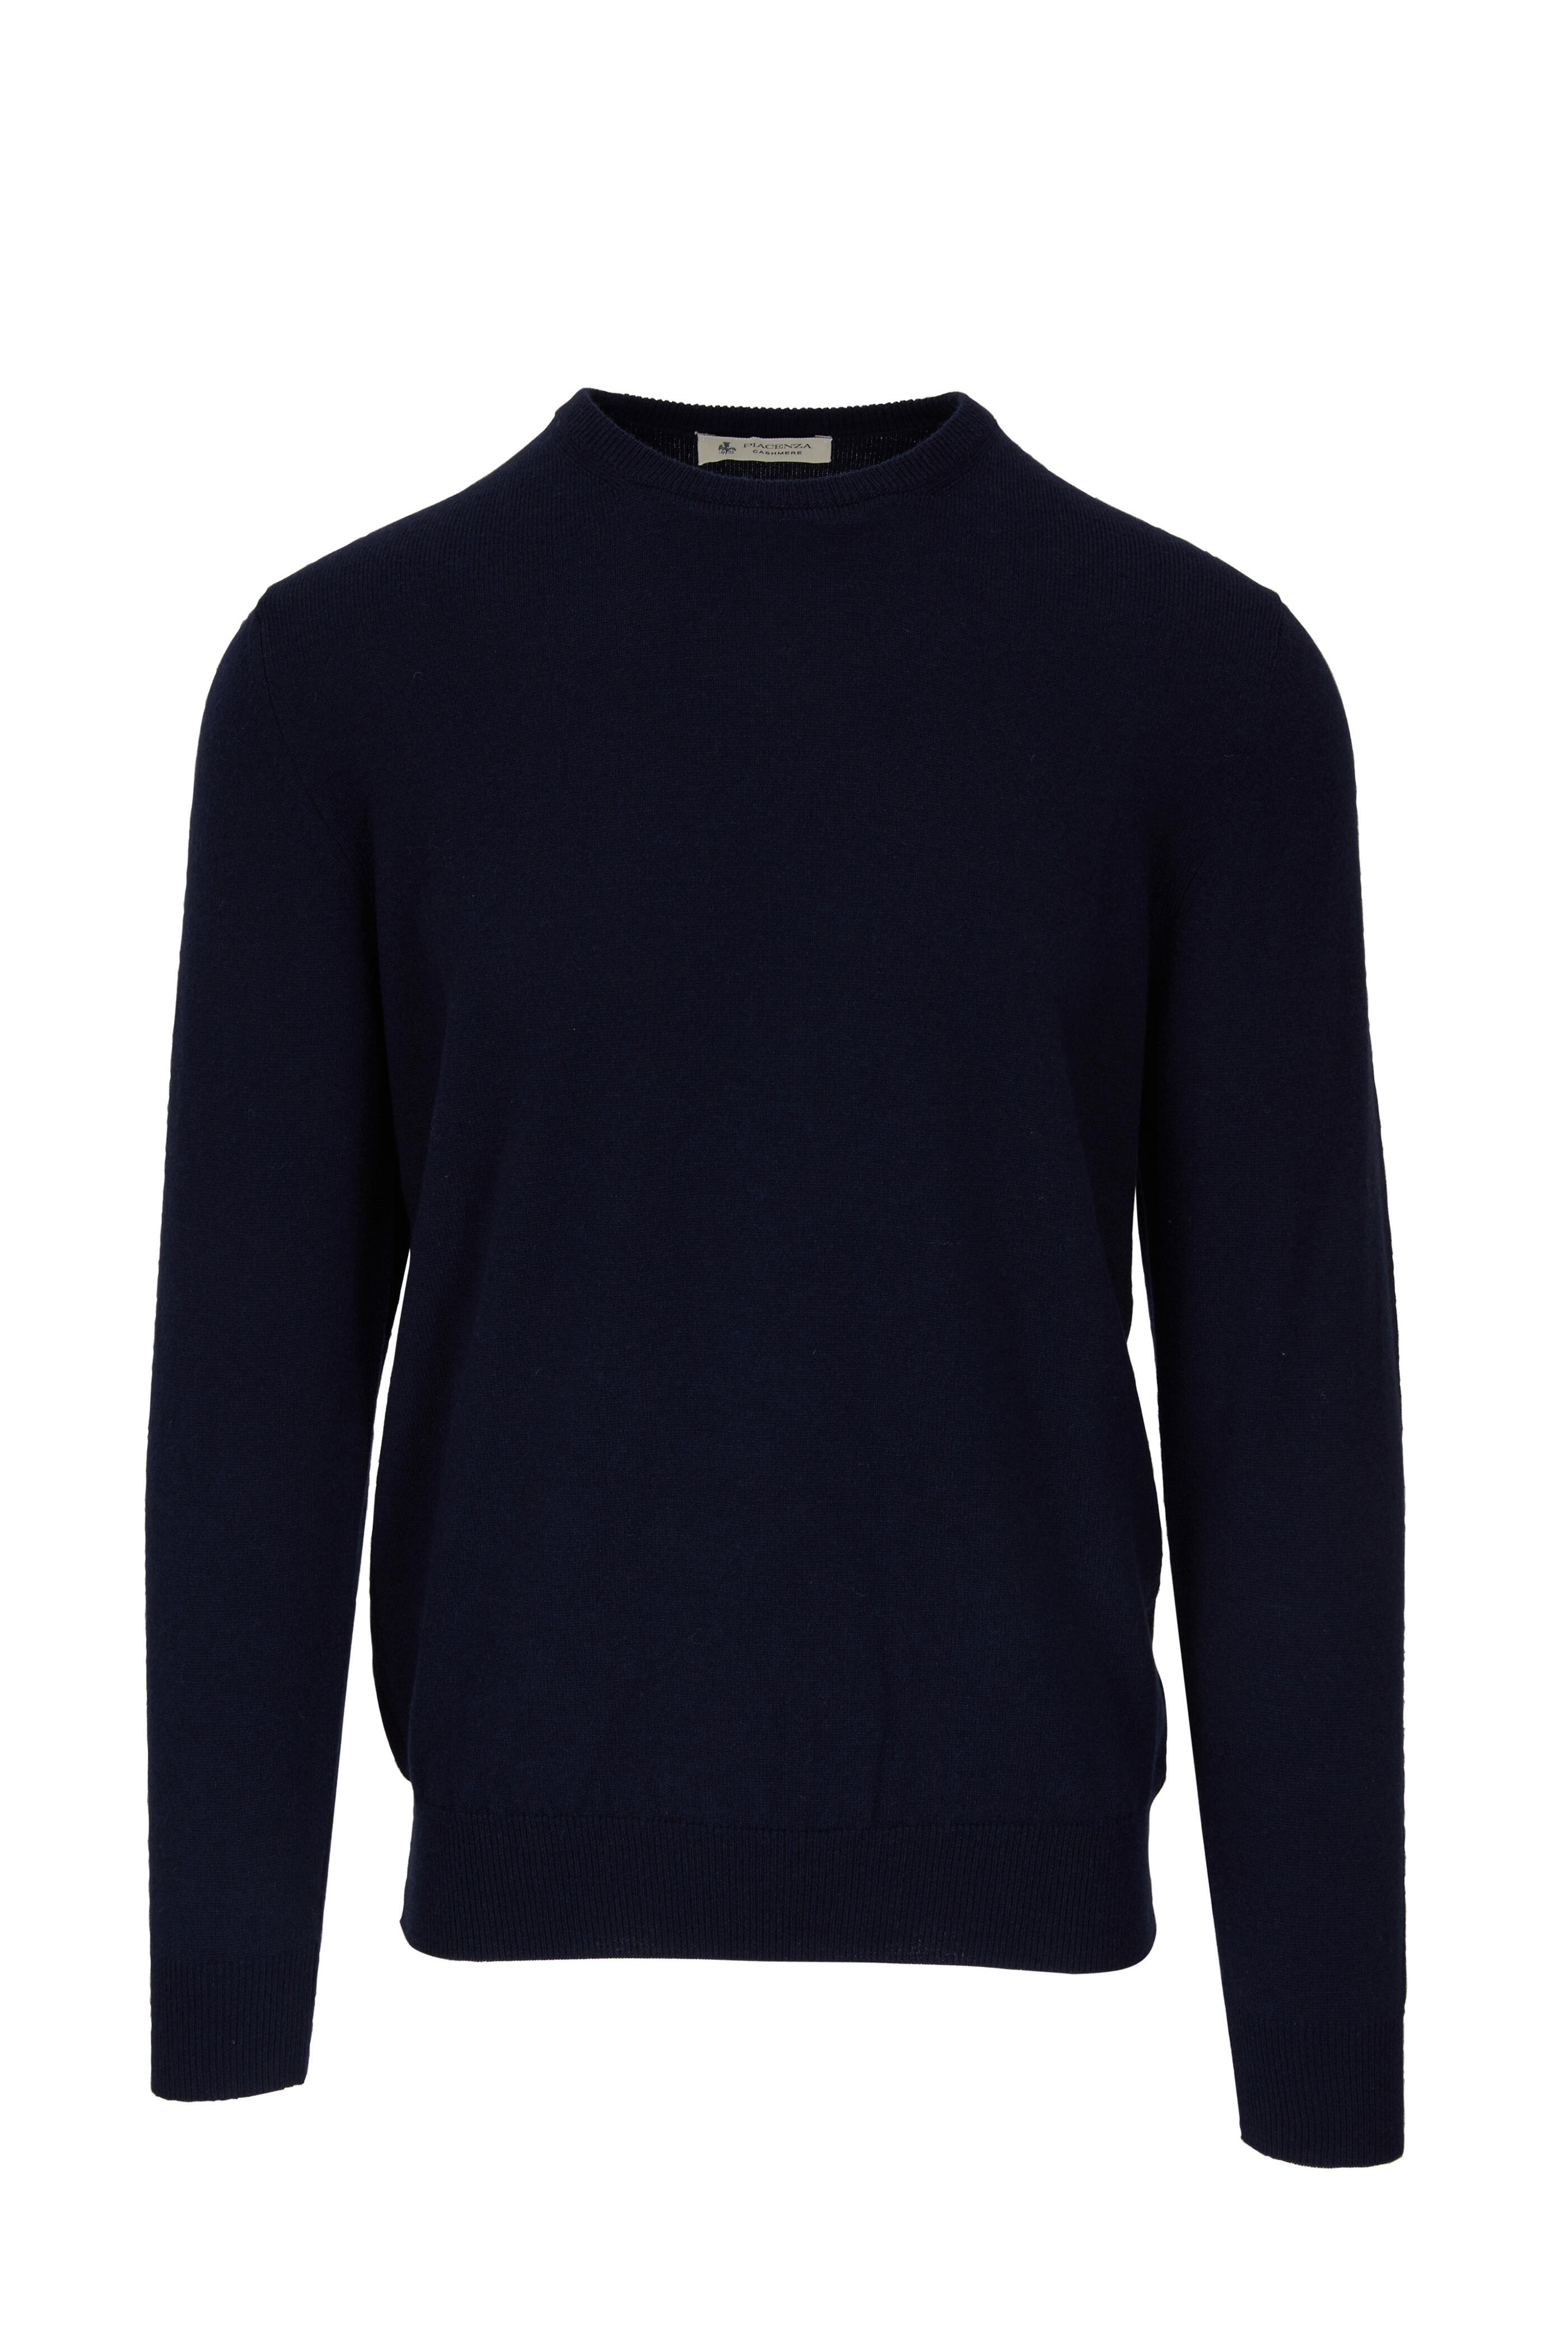 Piacenza Cashmere Cashmere Crew Neck Sweater Navy at